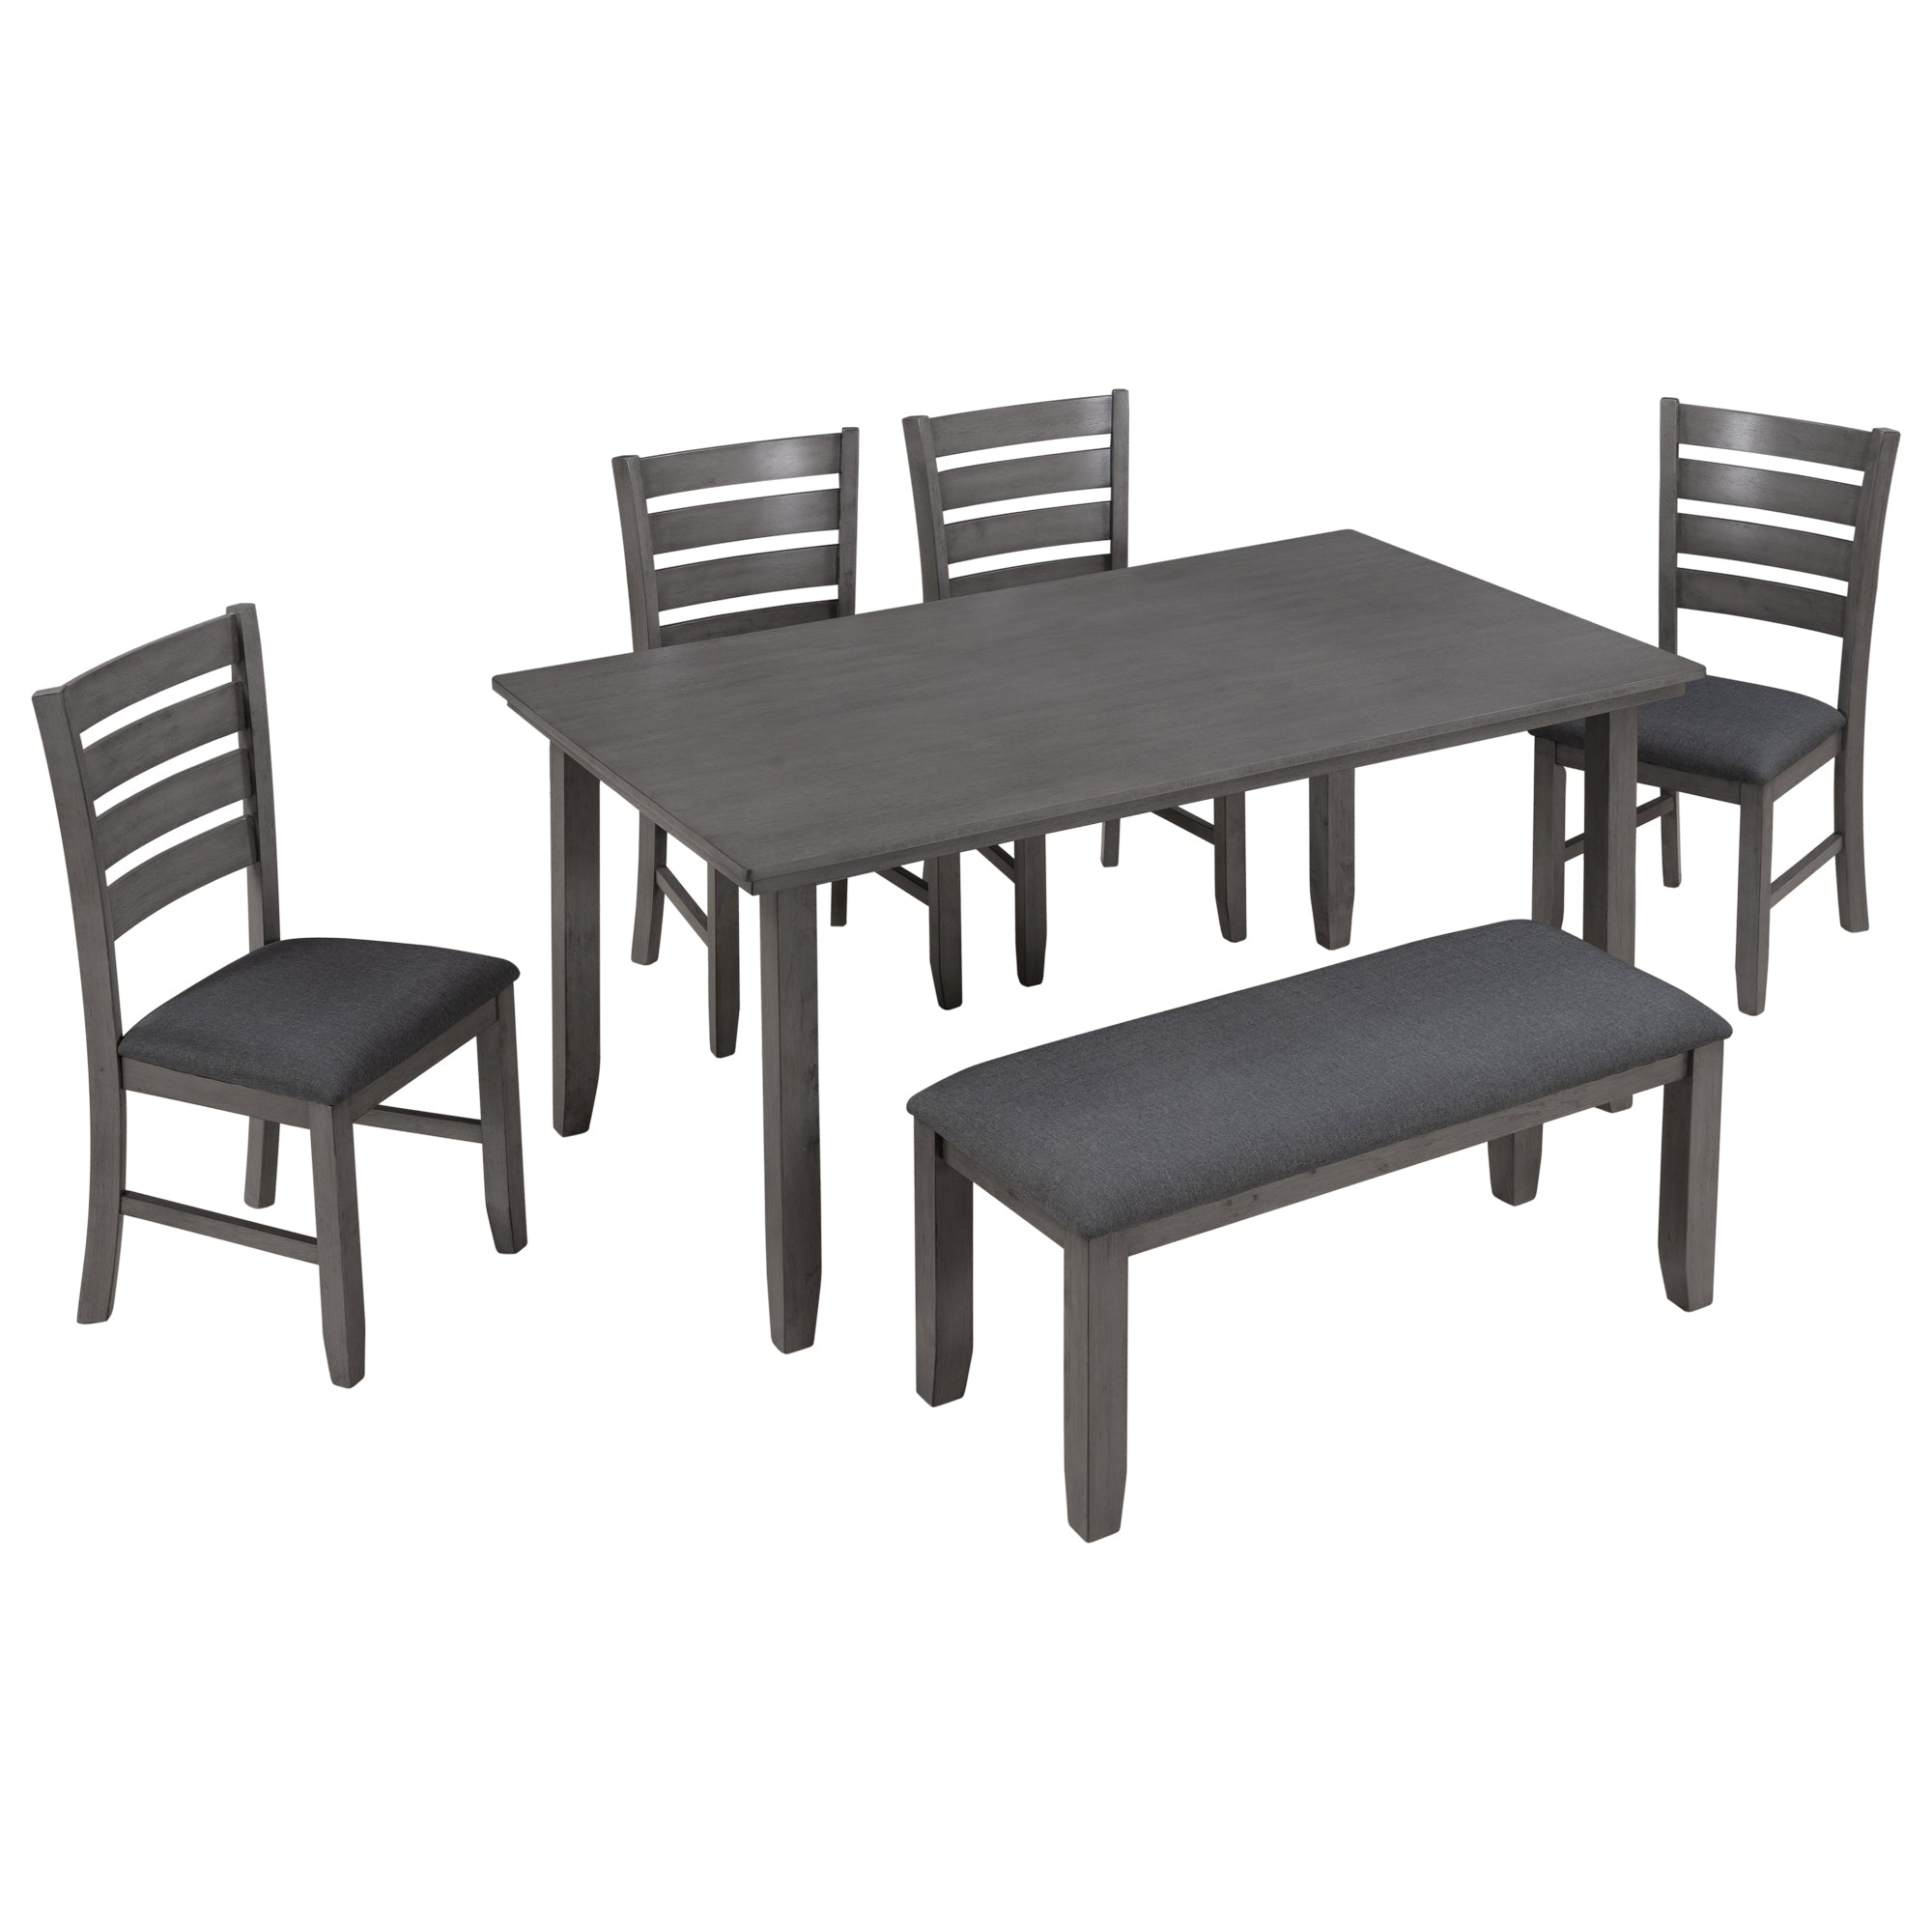 TREXM Dining Room Table and Chairs with Bench, Rustic Wood Dining Set, Set of 6 (Gray)